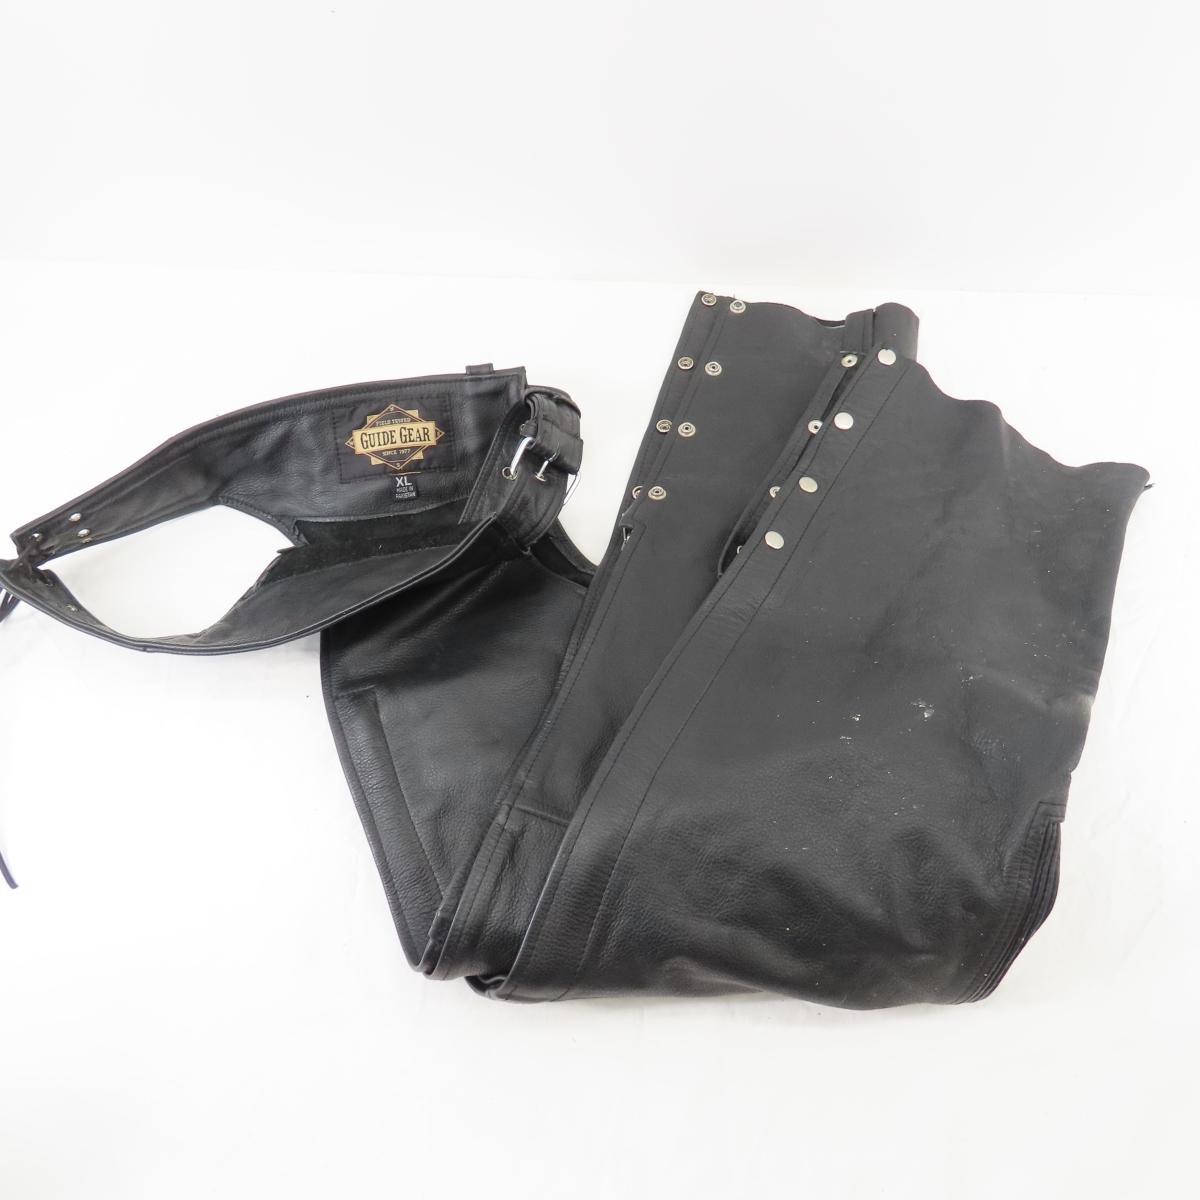 Kickstand plate, Leather Coat & Riding Gear